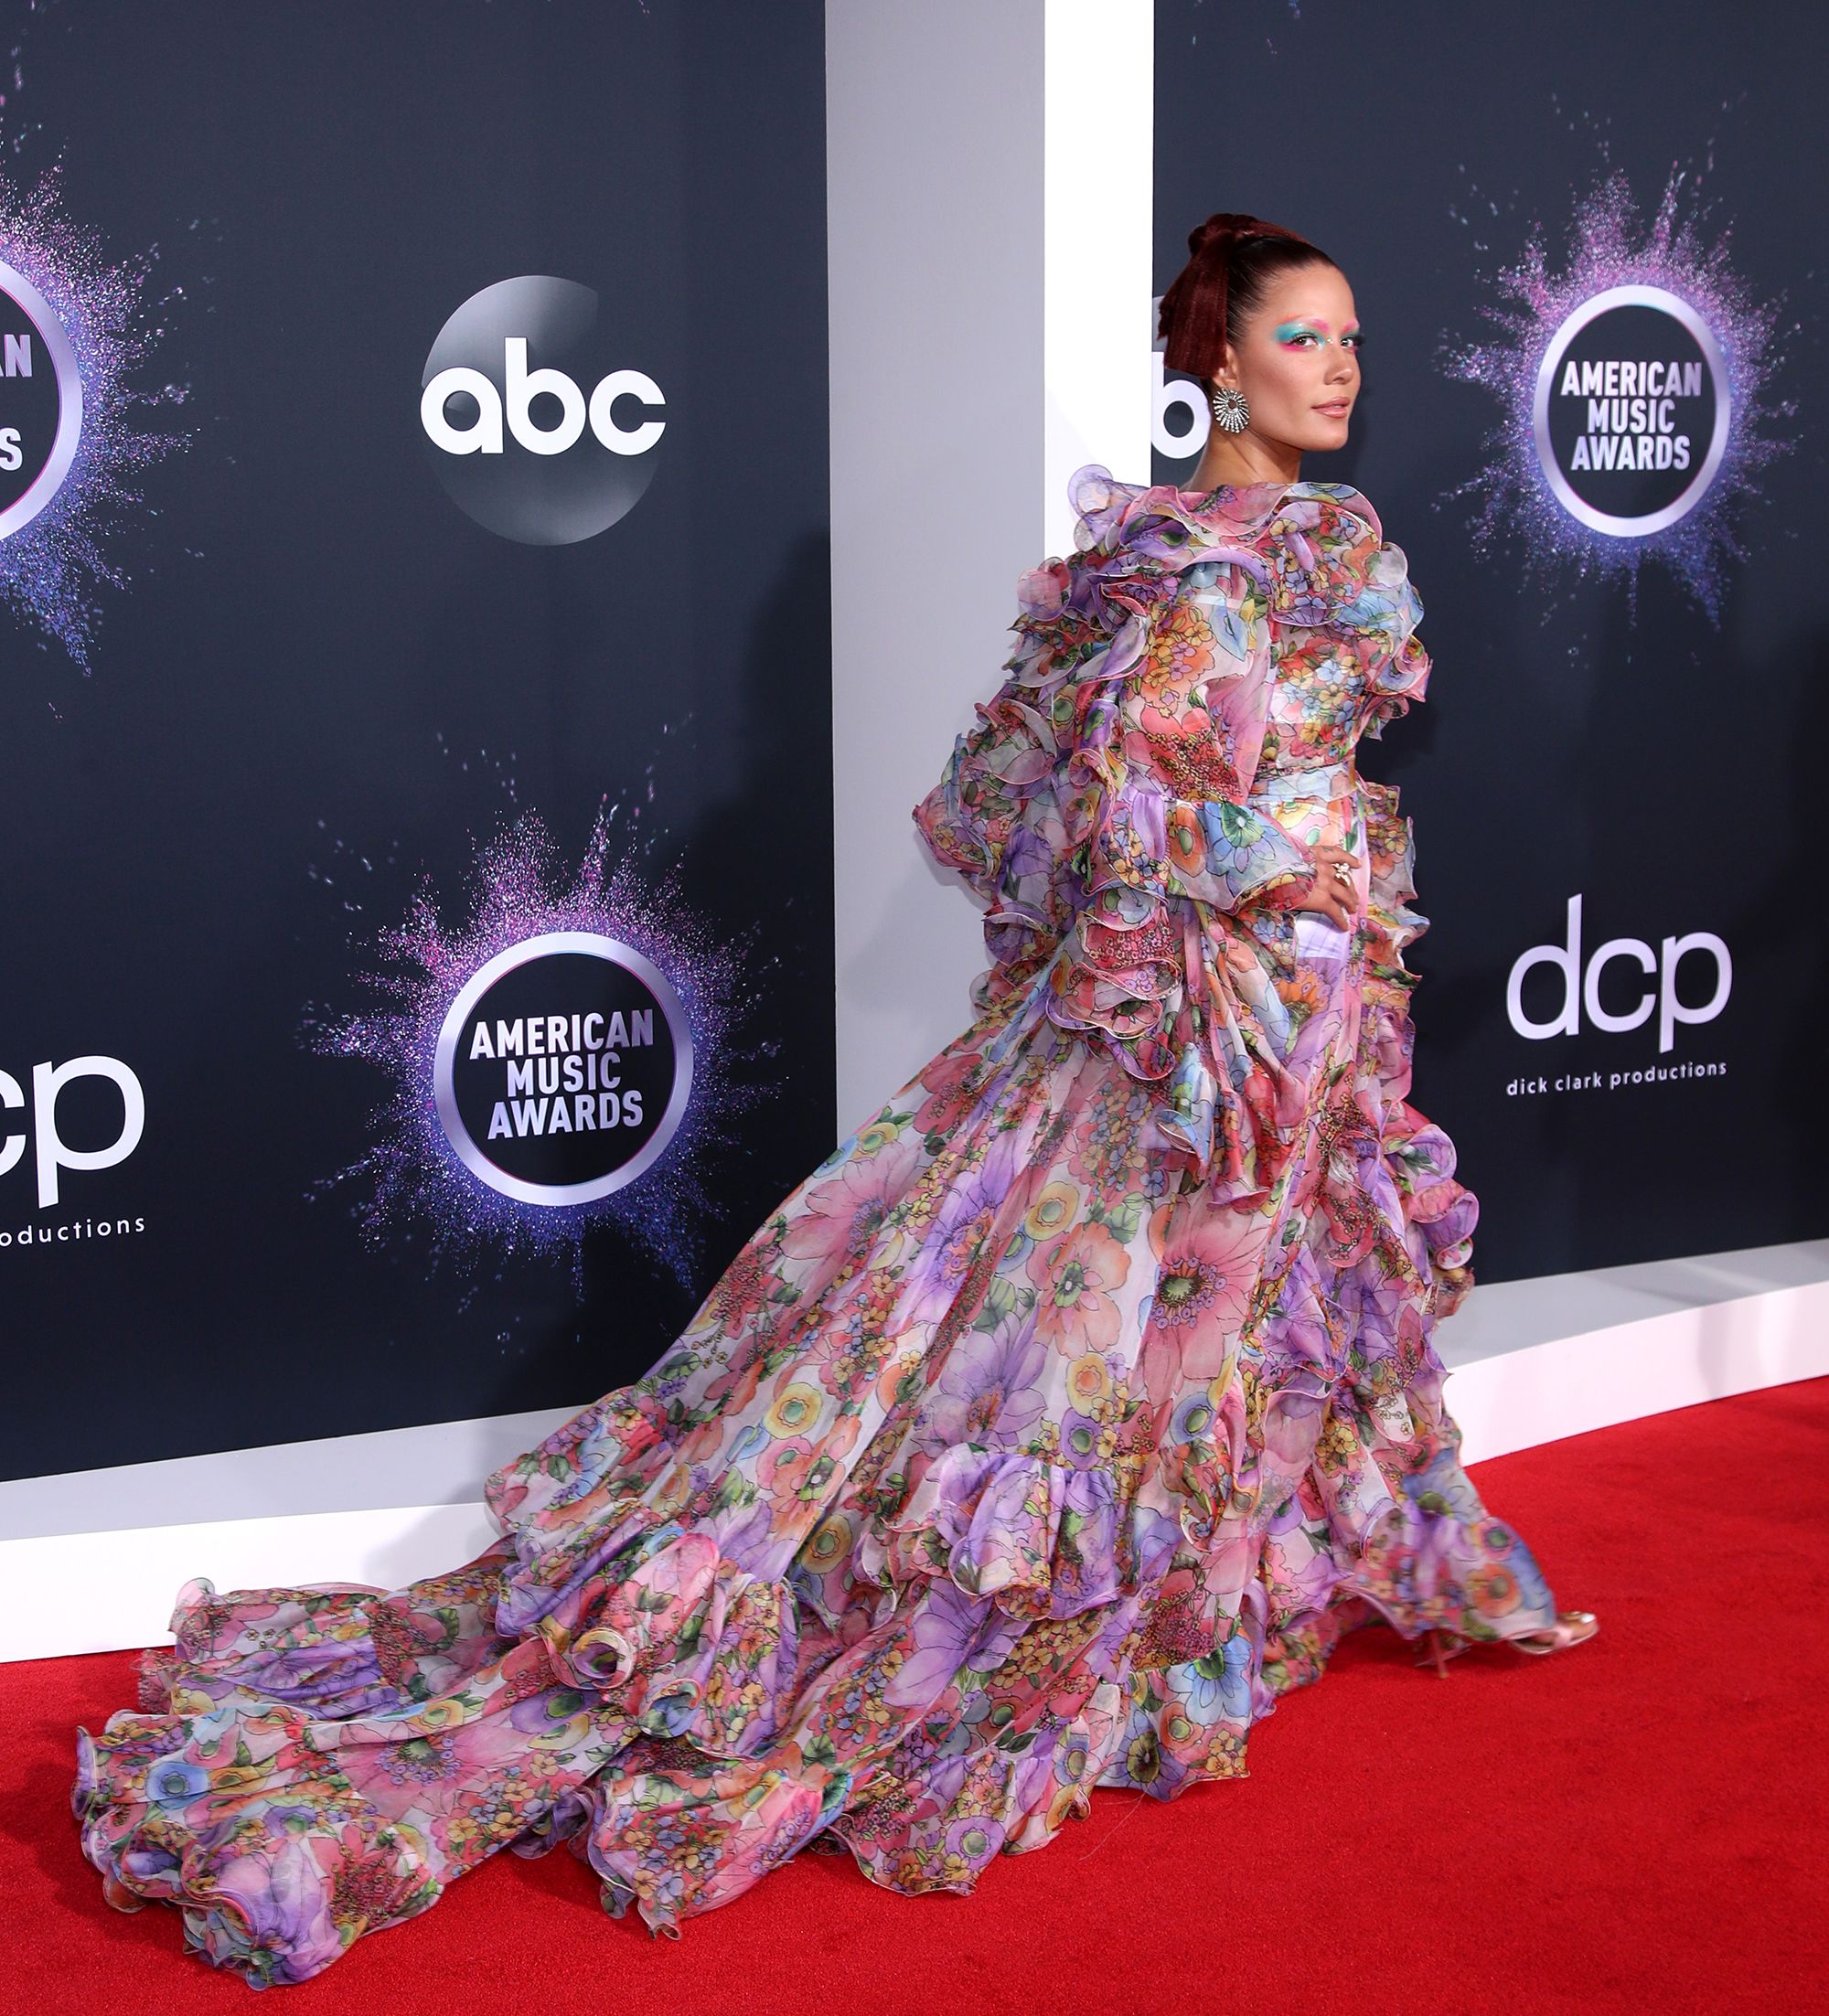 The Best Looks From the 2019 American Music Awards